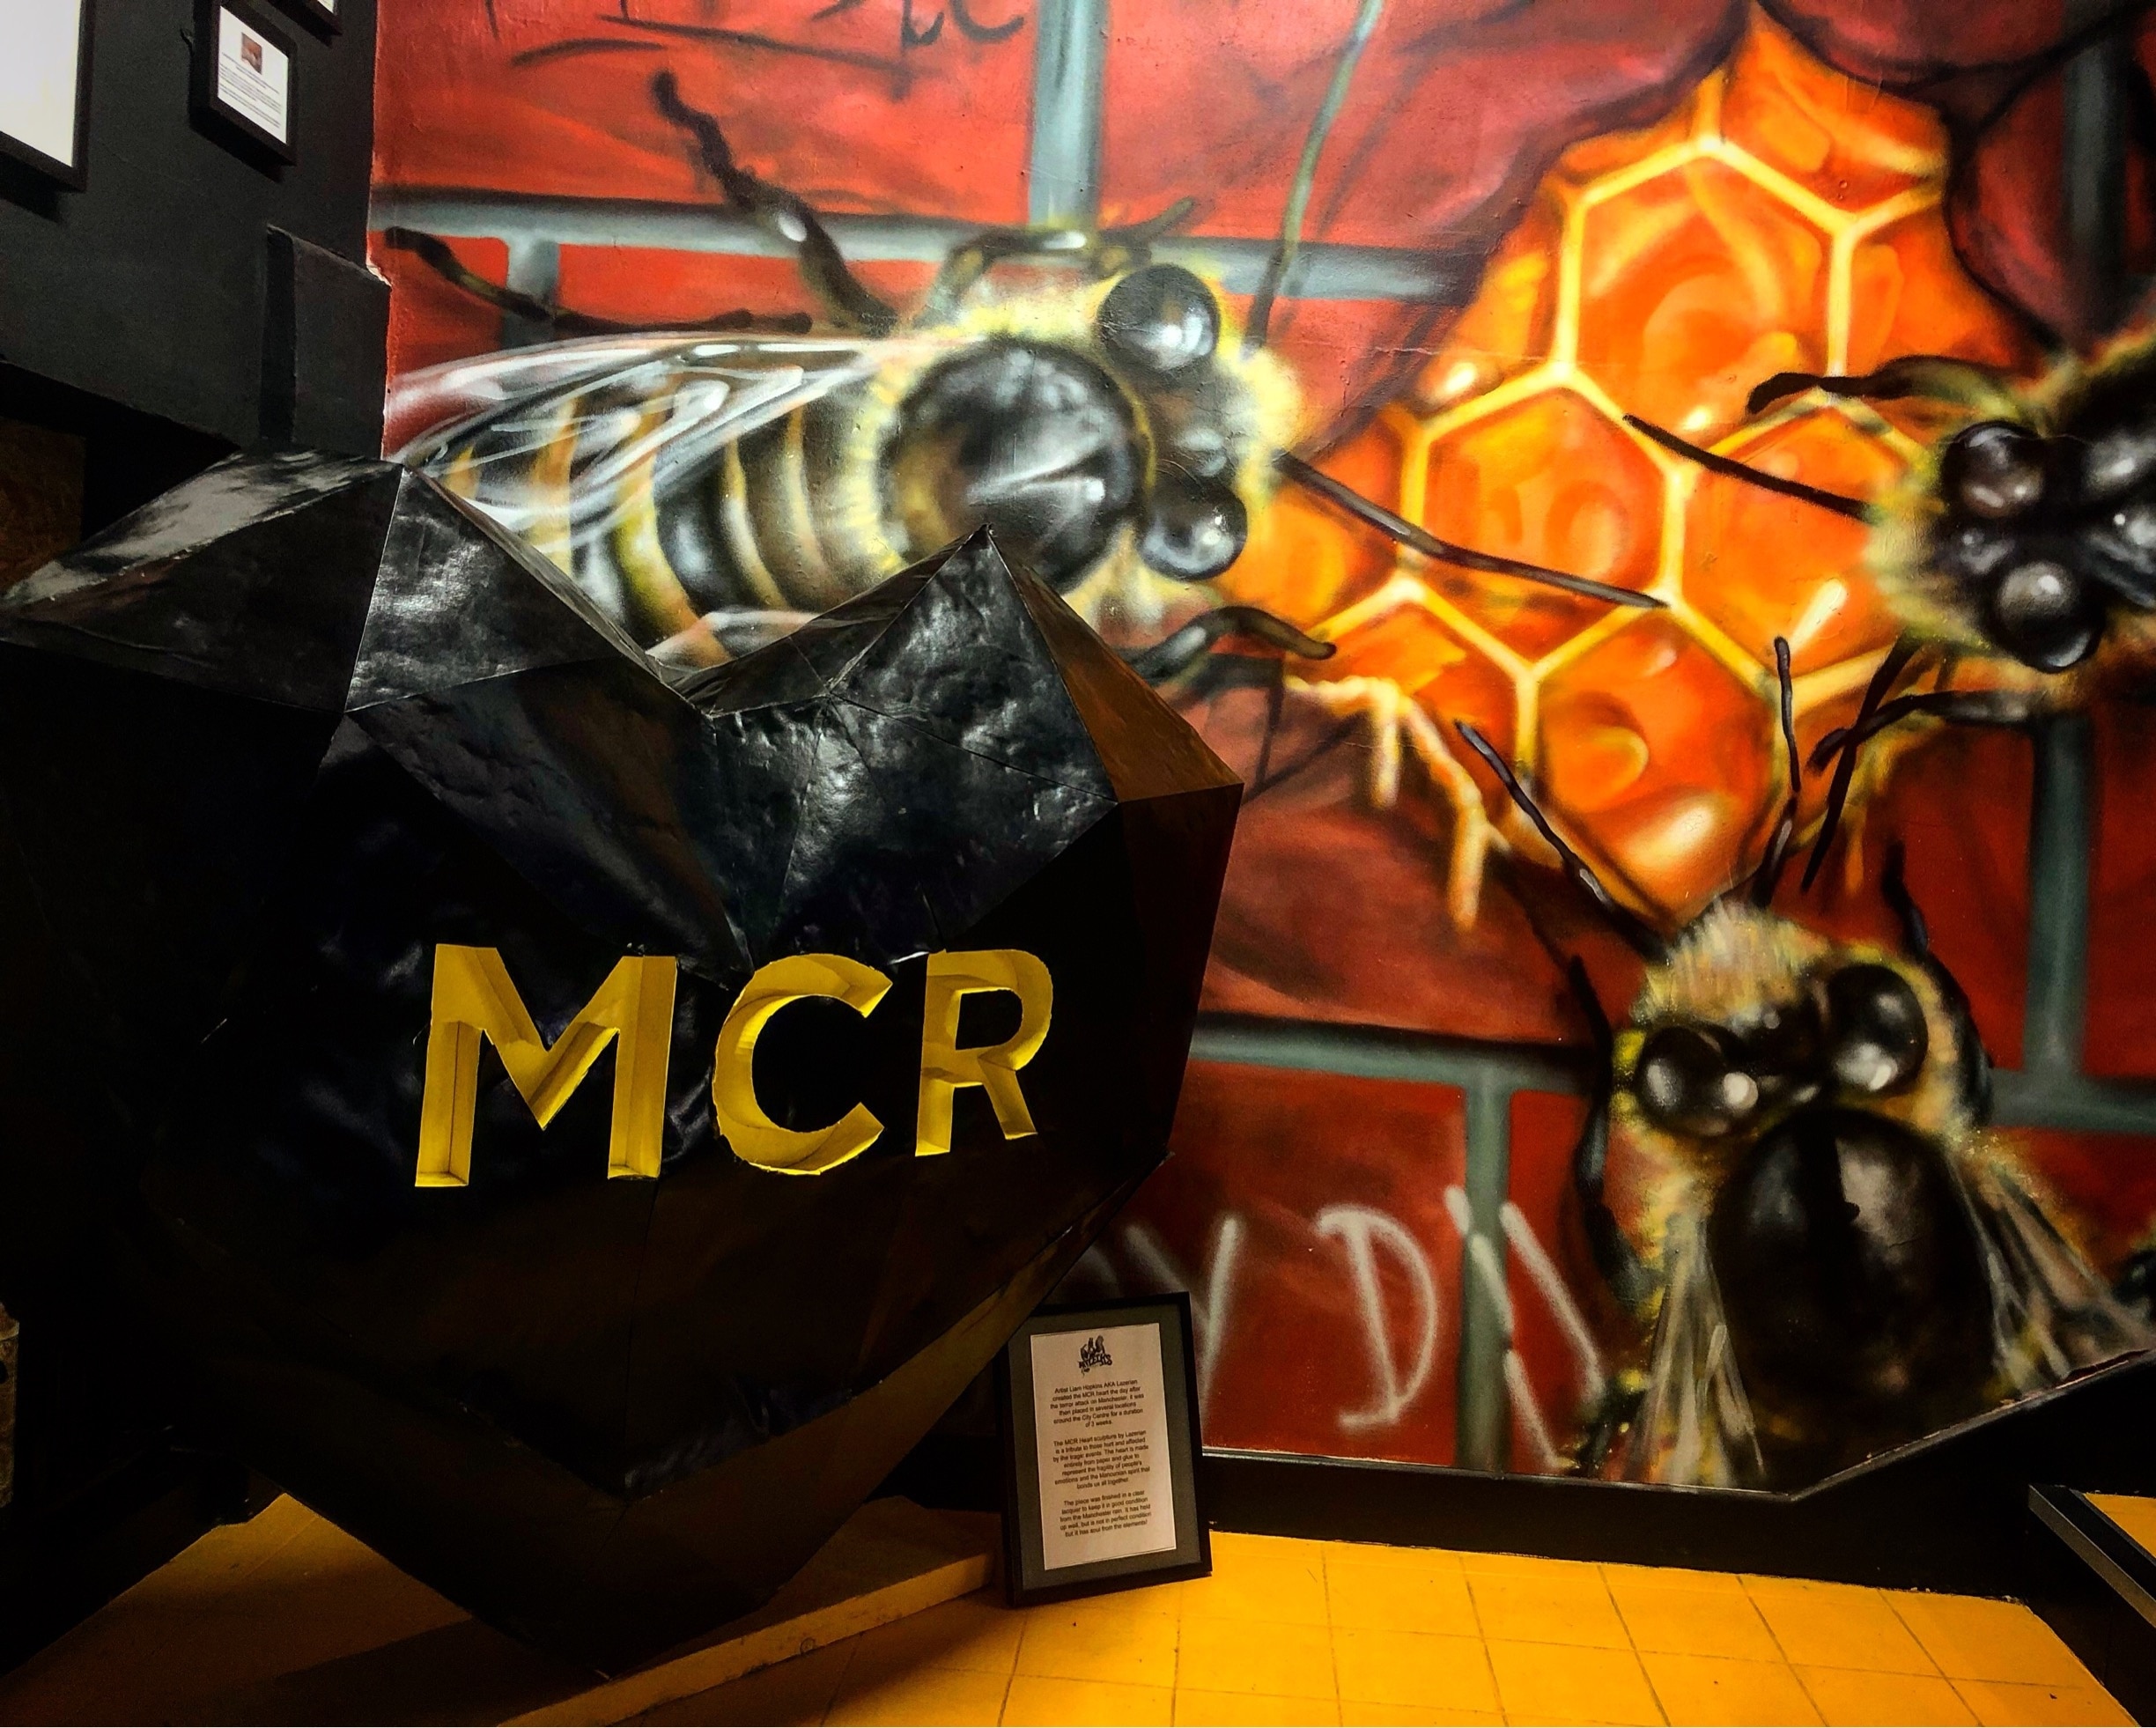 Since the tragedy of the Manchester Arena bombing, the bee has become an even more iconic symbol of this amazing city, highlighting the working ethic of this community, and in this case, their strength in working together #manchester #mcr #Culture